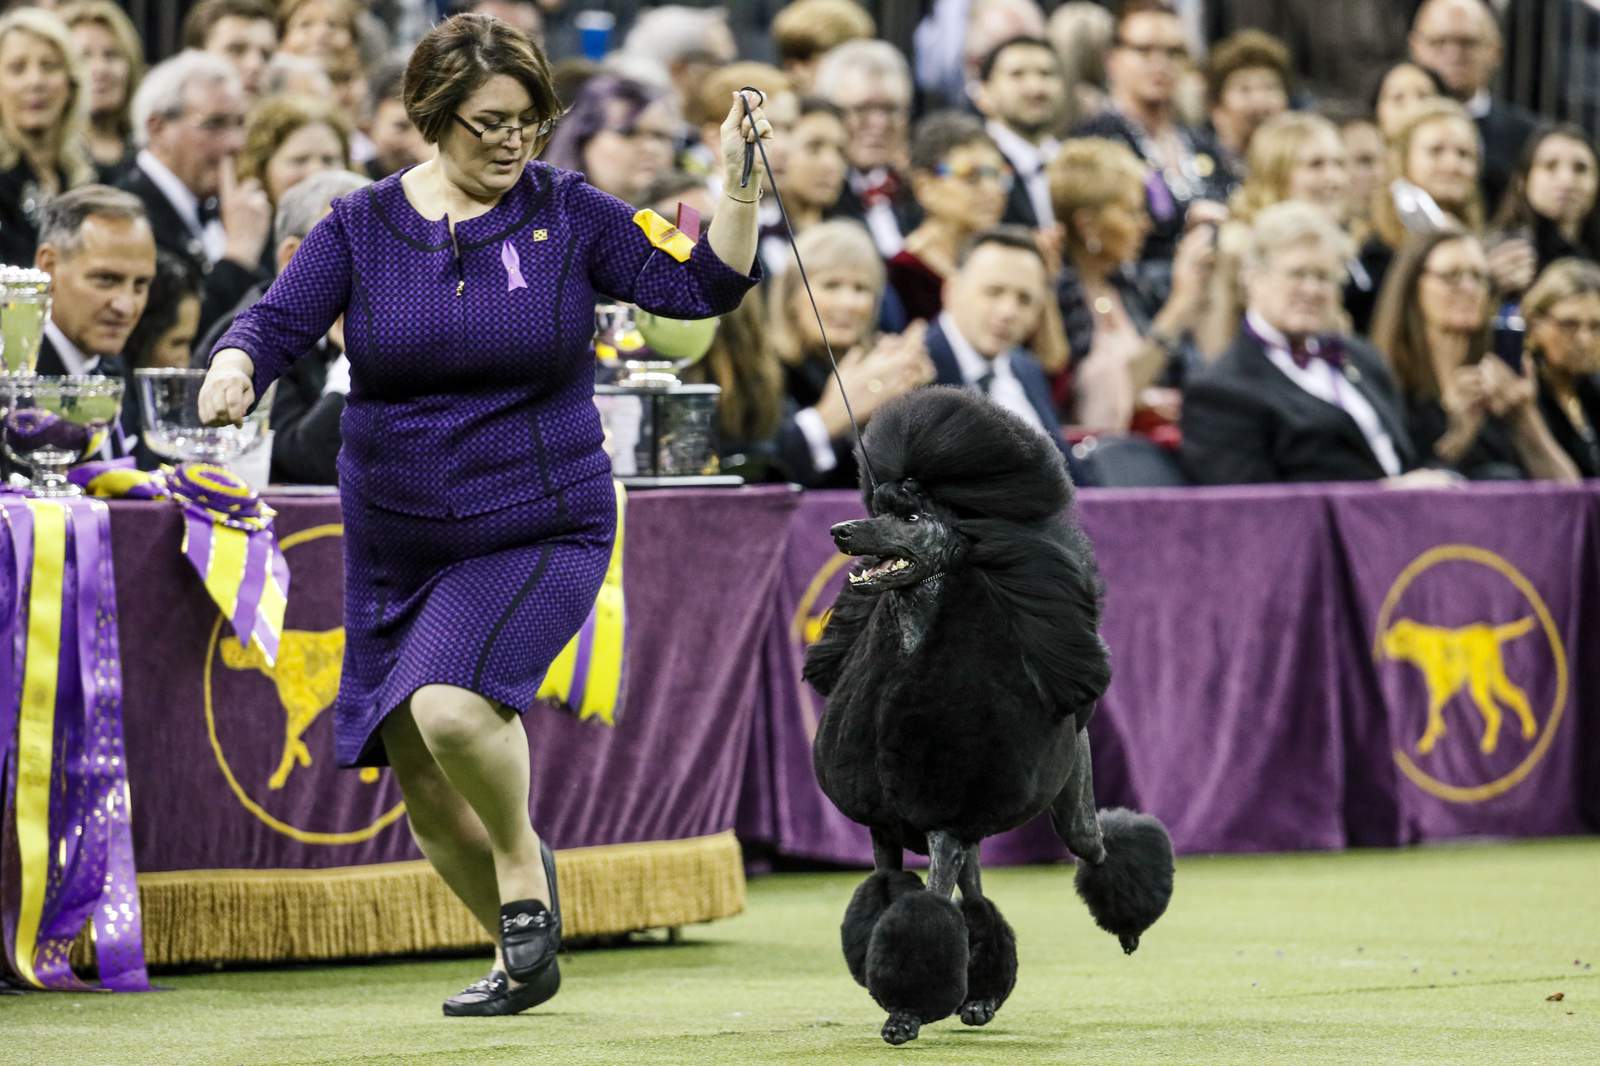 Westminster dog show won’t have spectators due to virus